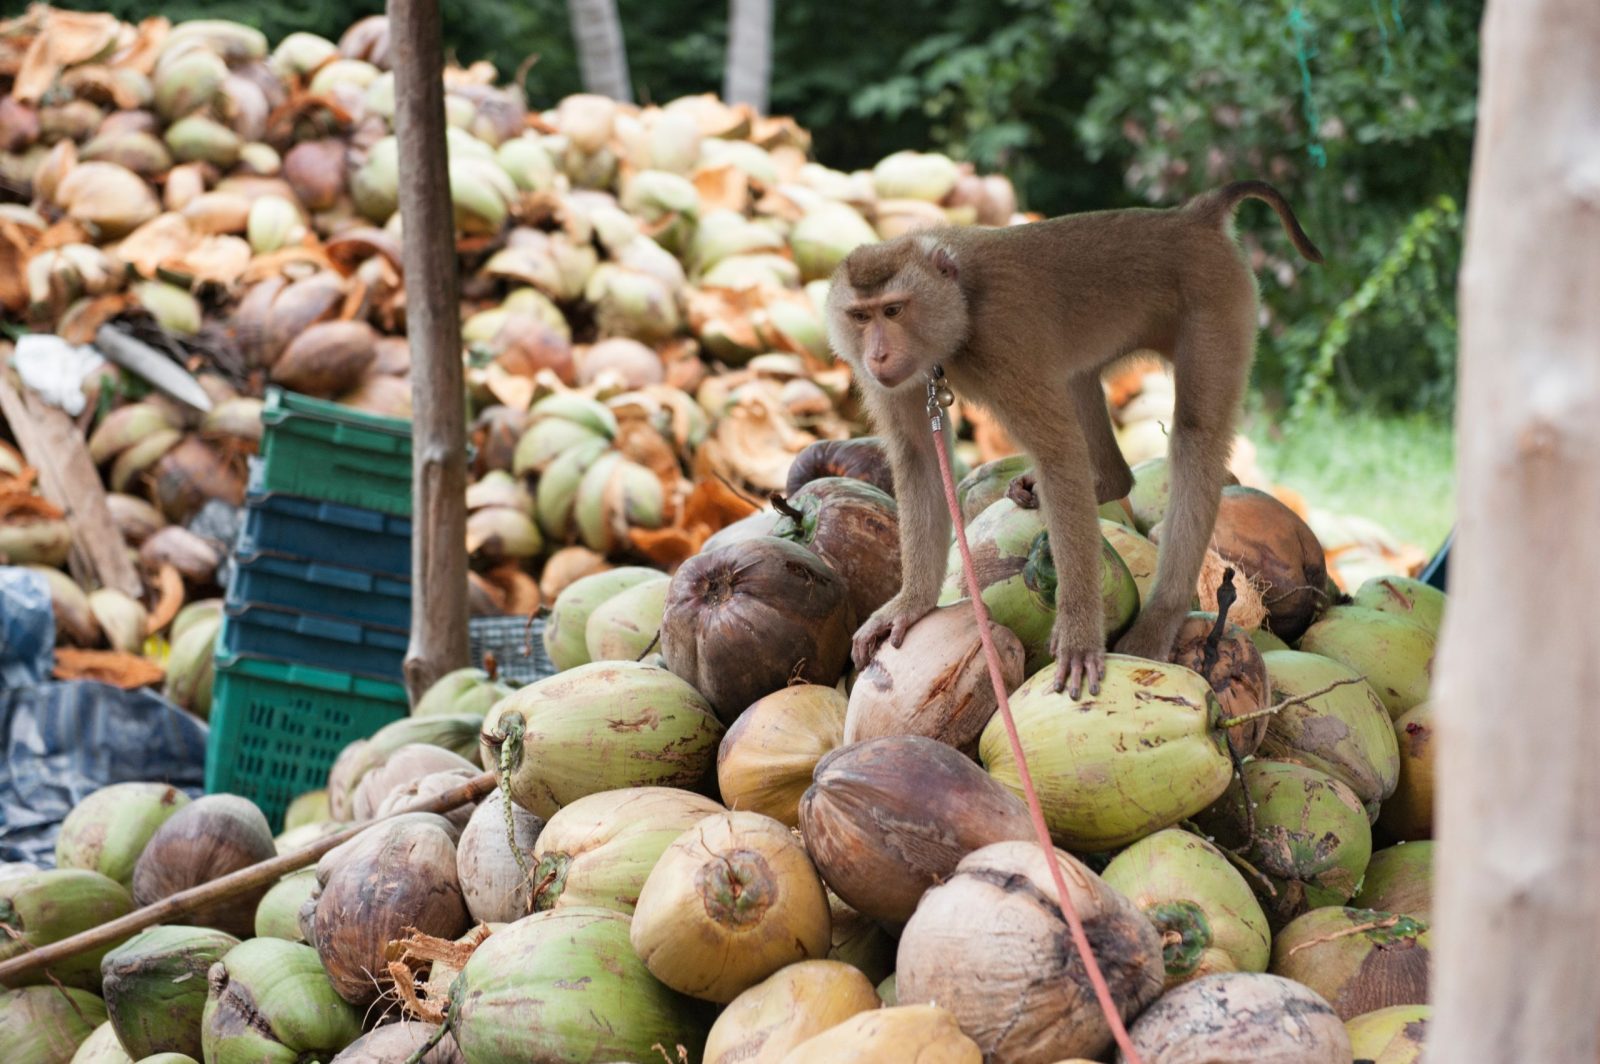 shutterstock_1150062323-scaled-e1678921564435.jpgfit16002C1064ssl1 Finally! HelloFresh Will Stop Sourcing Coconuts From Thailand Over Animal Cruelty Concerns